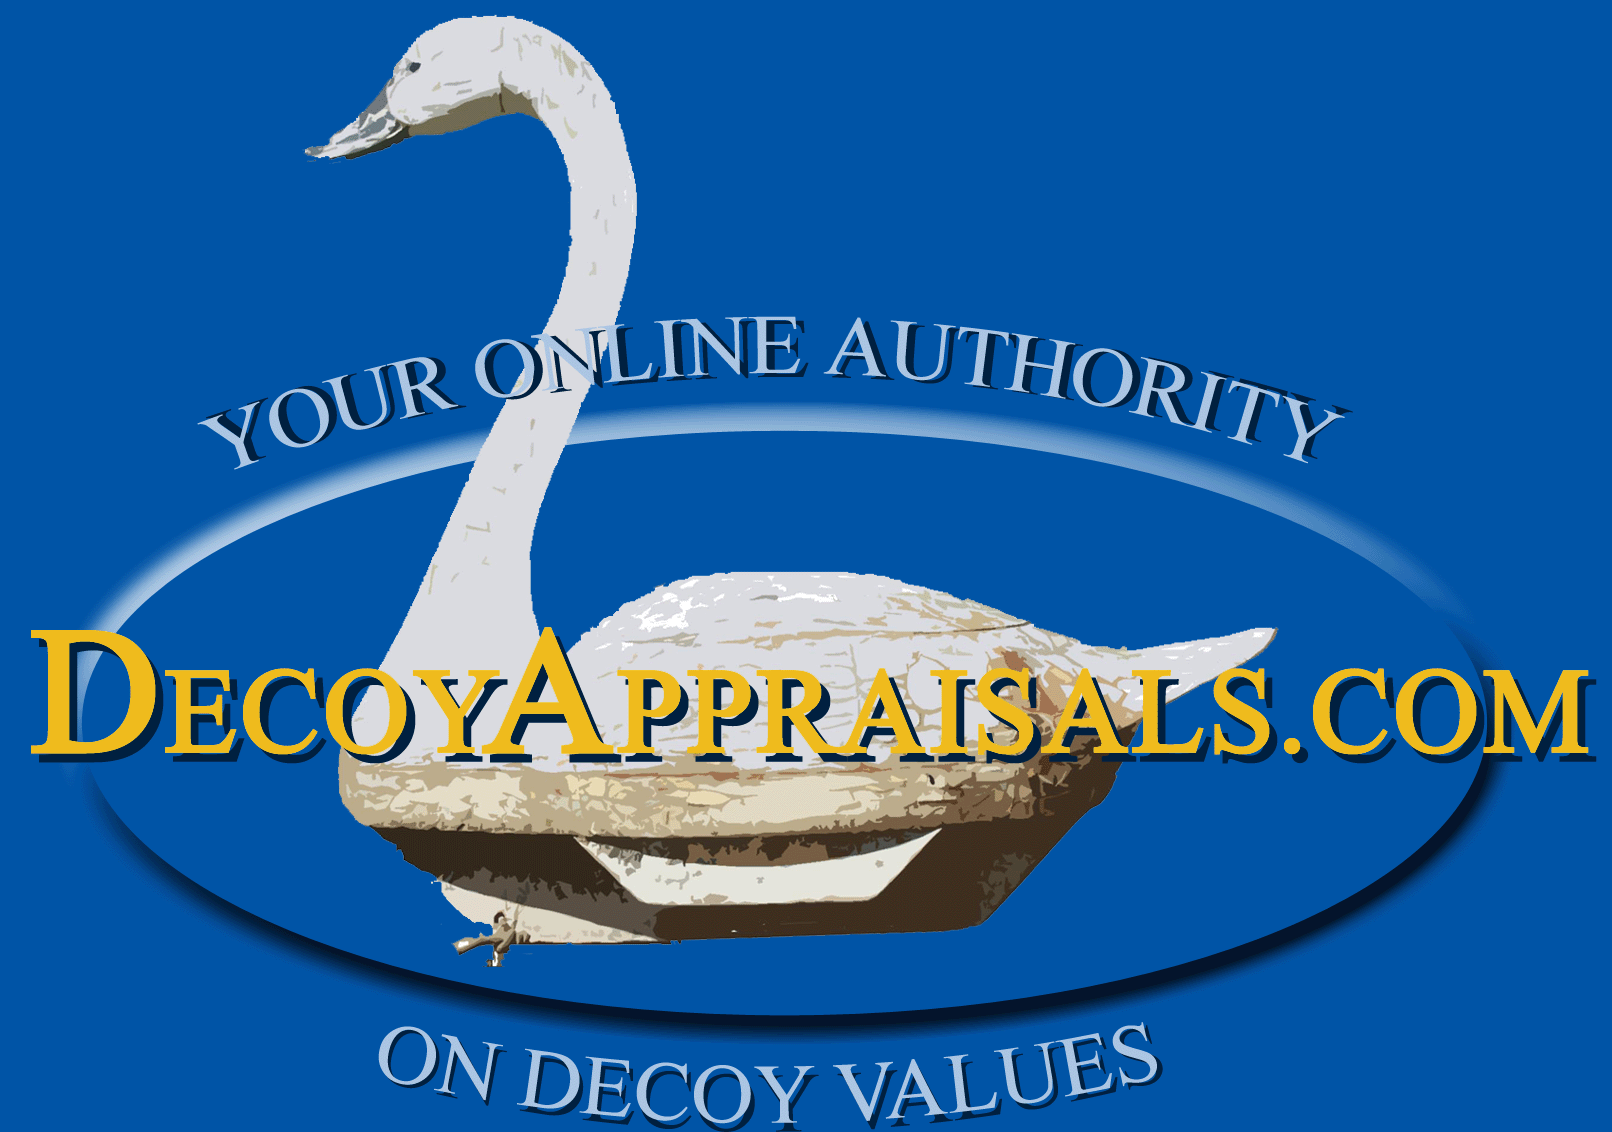 We can appraise and sell your decoy or decoys on this website